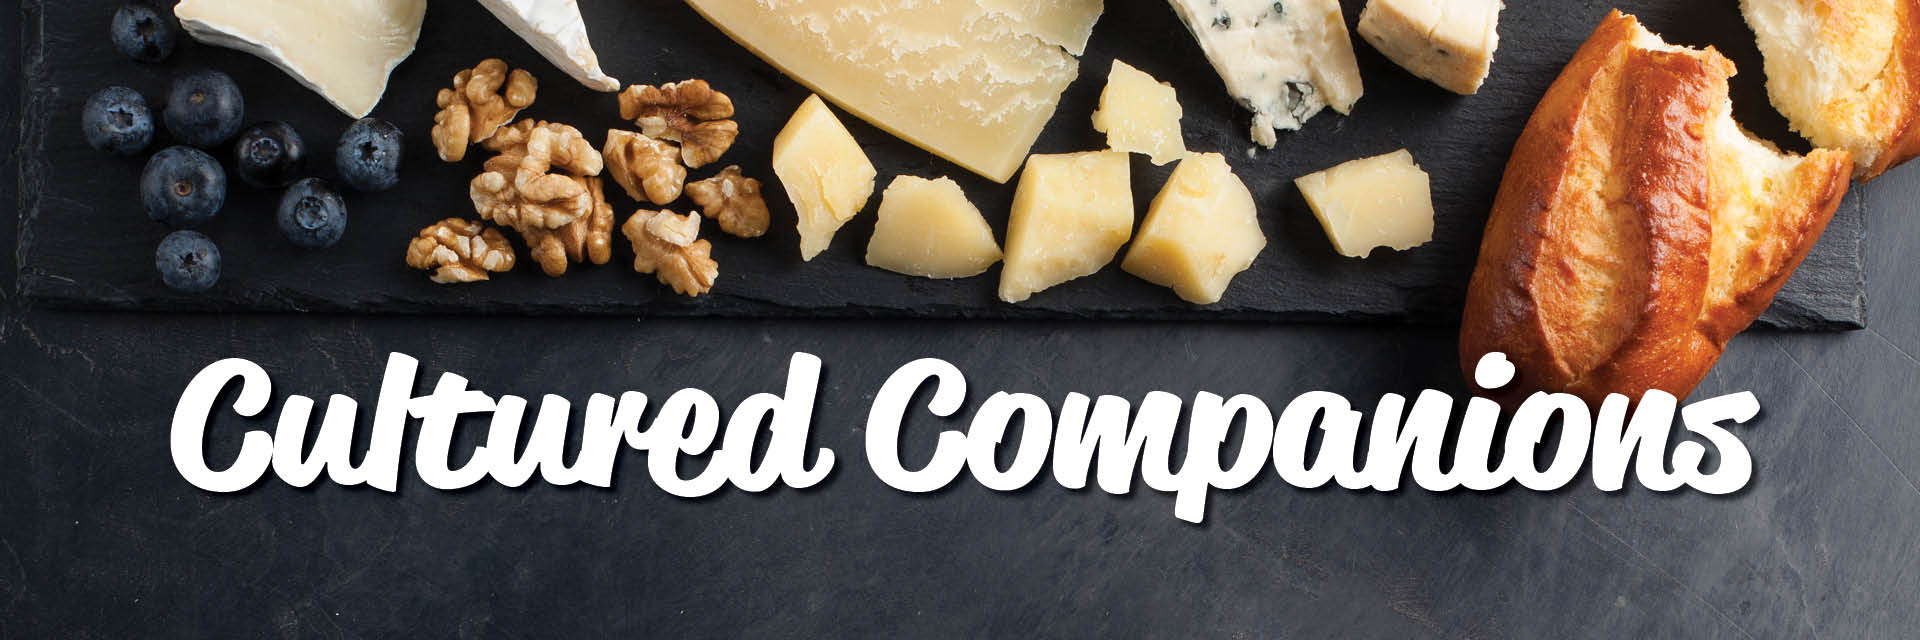 Featured Gourmet Cheeses at West Seattle Thriftway